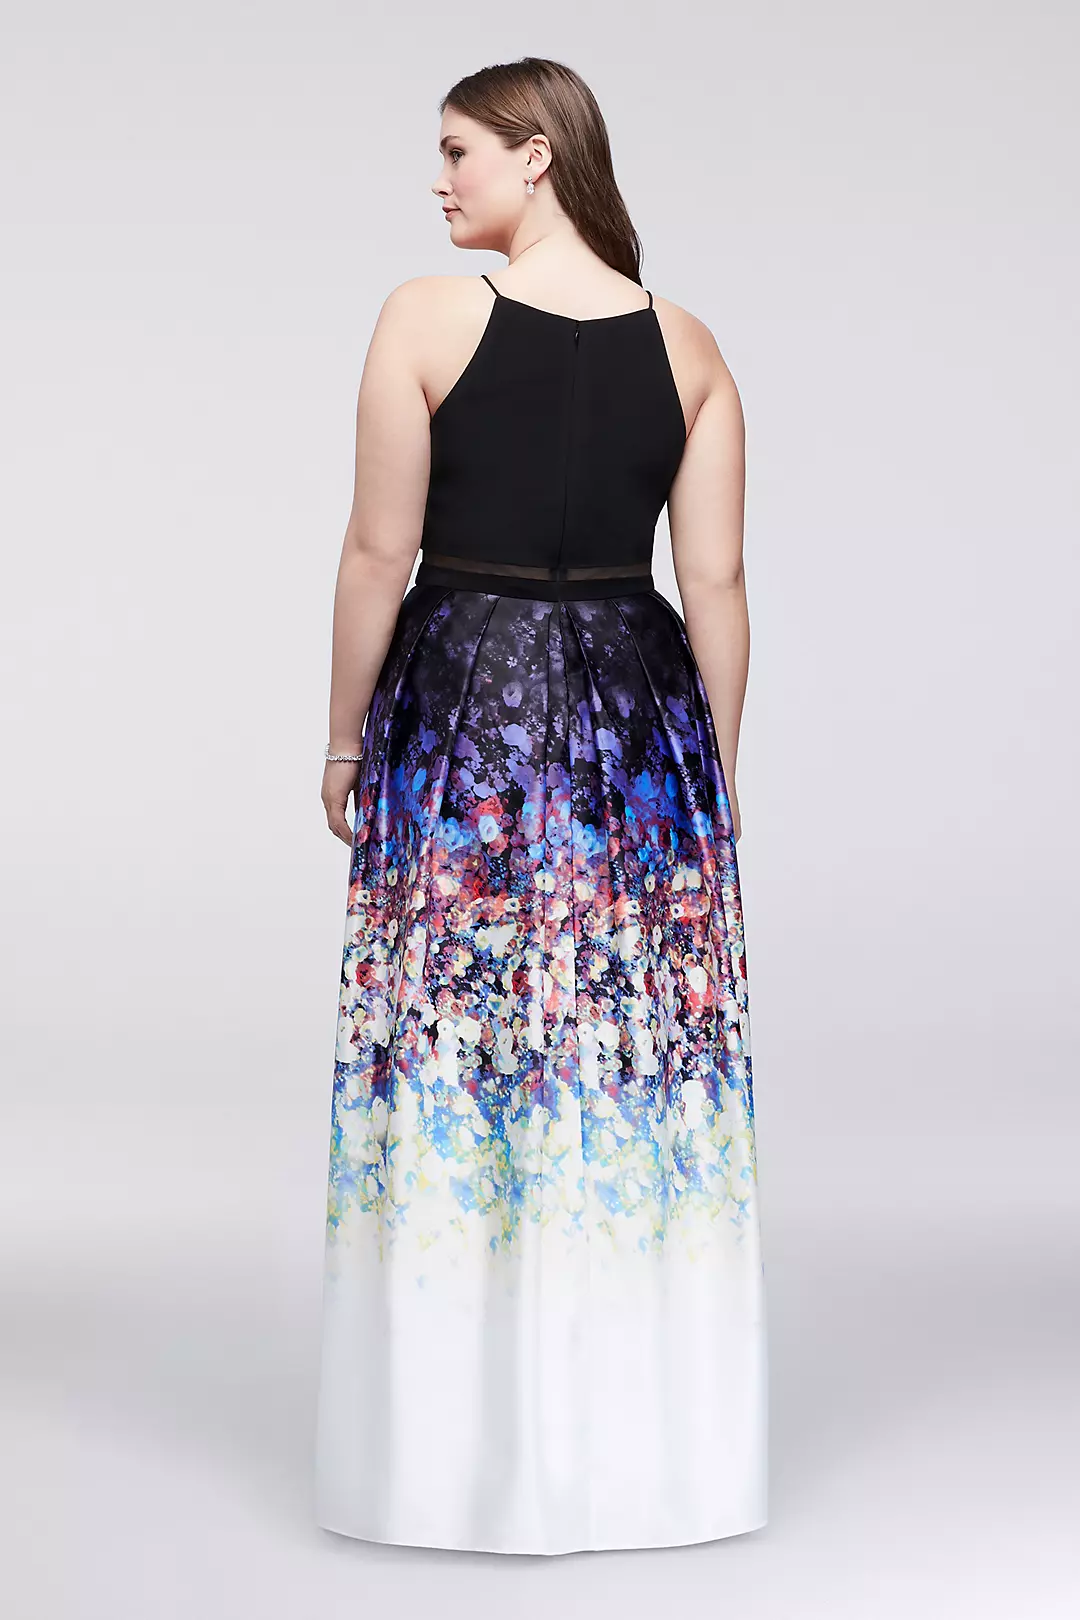 Faux Two-Piece Halter Dress with Floral Skirt Image 2